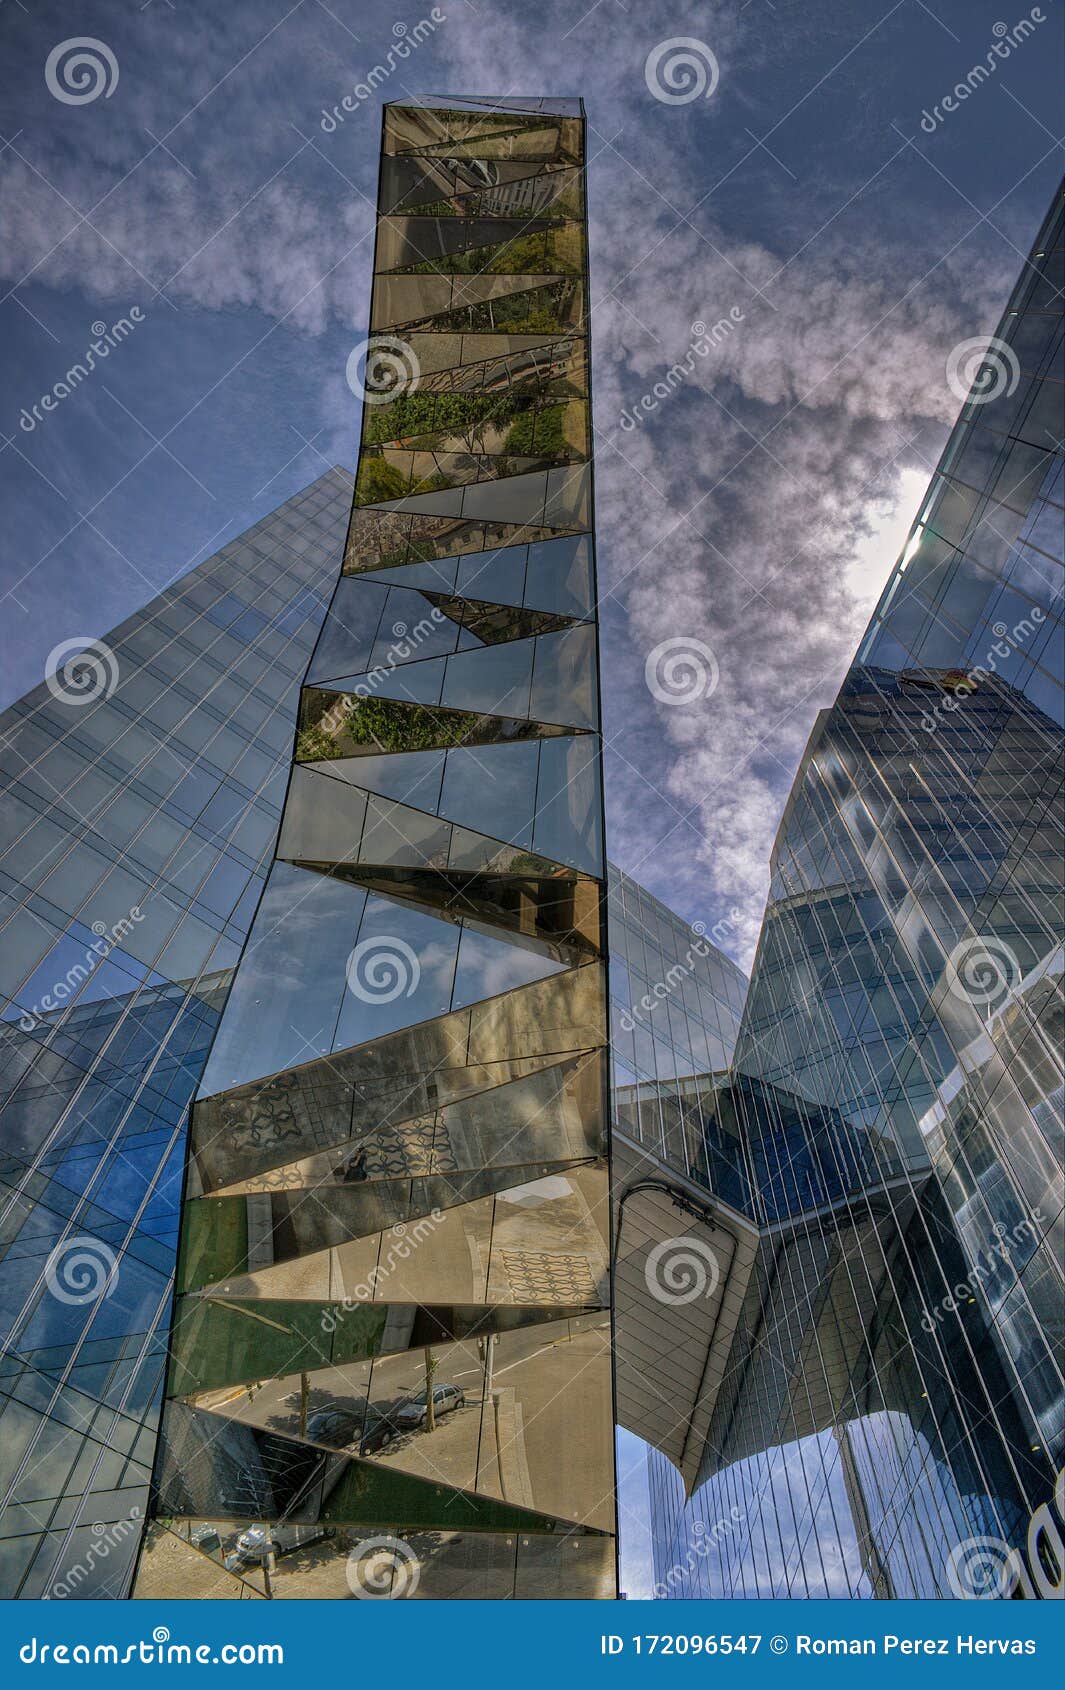 glazed office building with reflections of other buildings